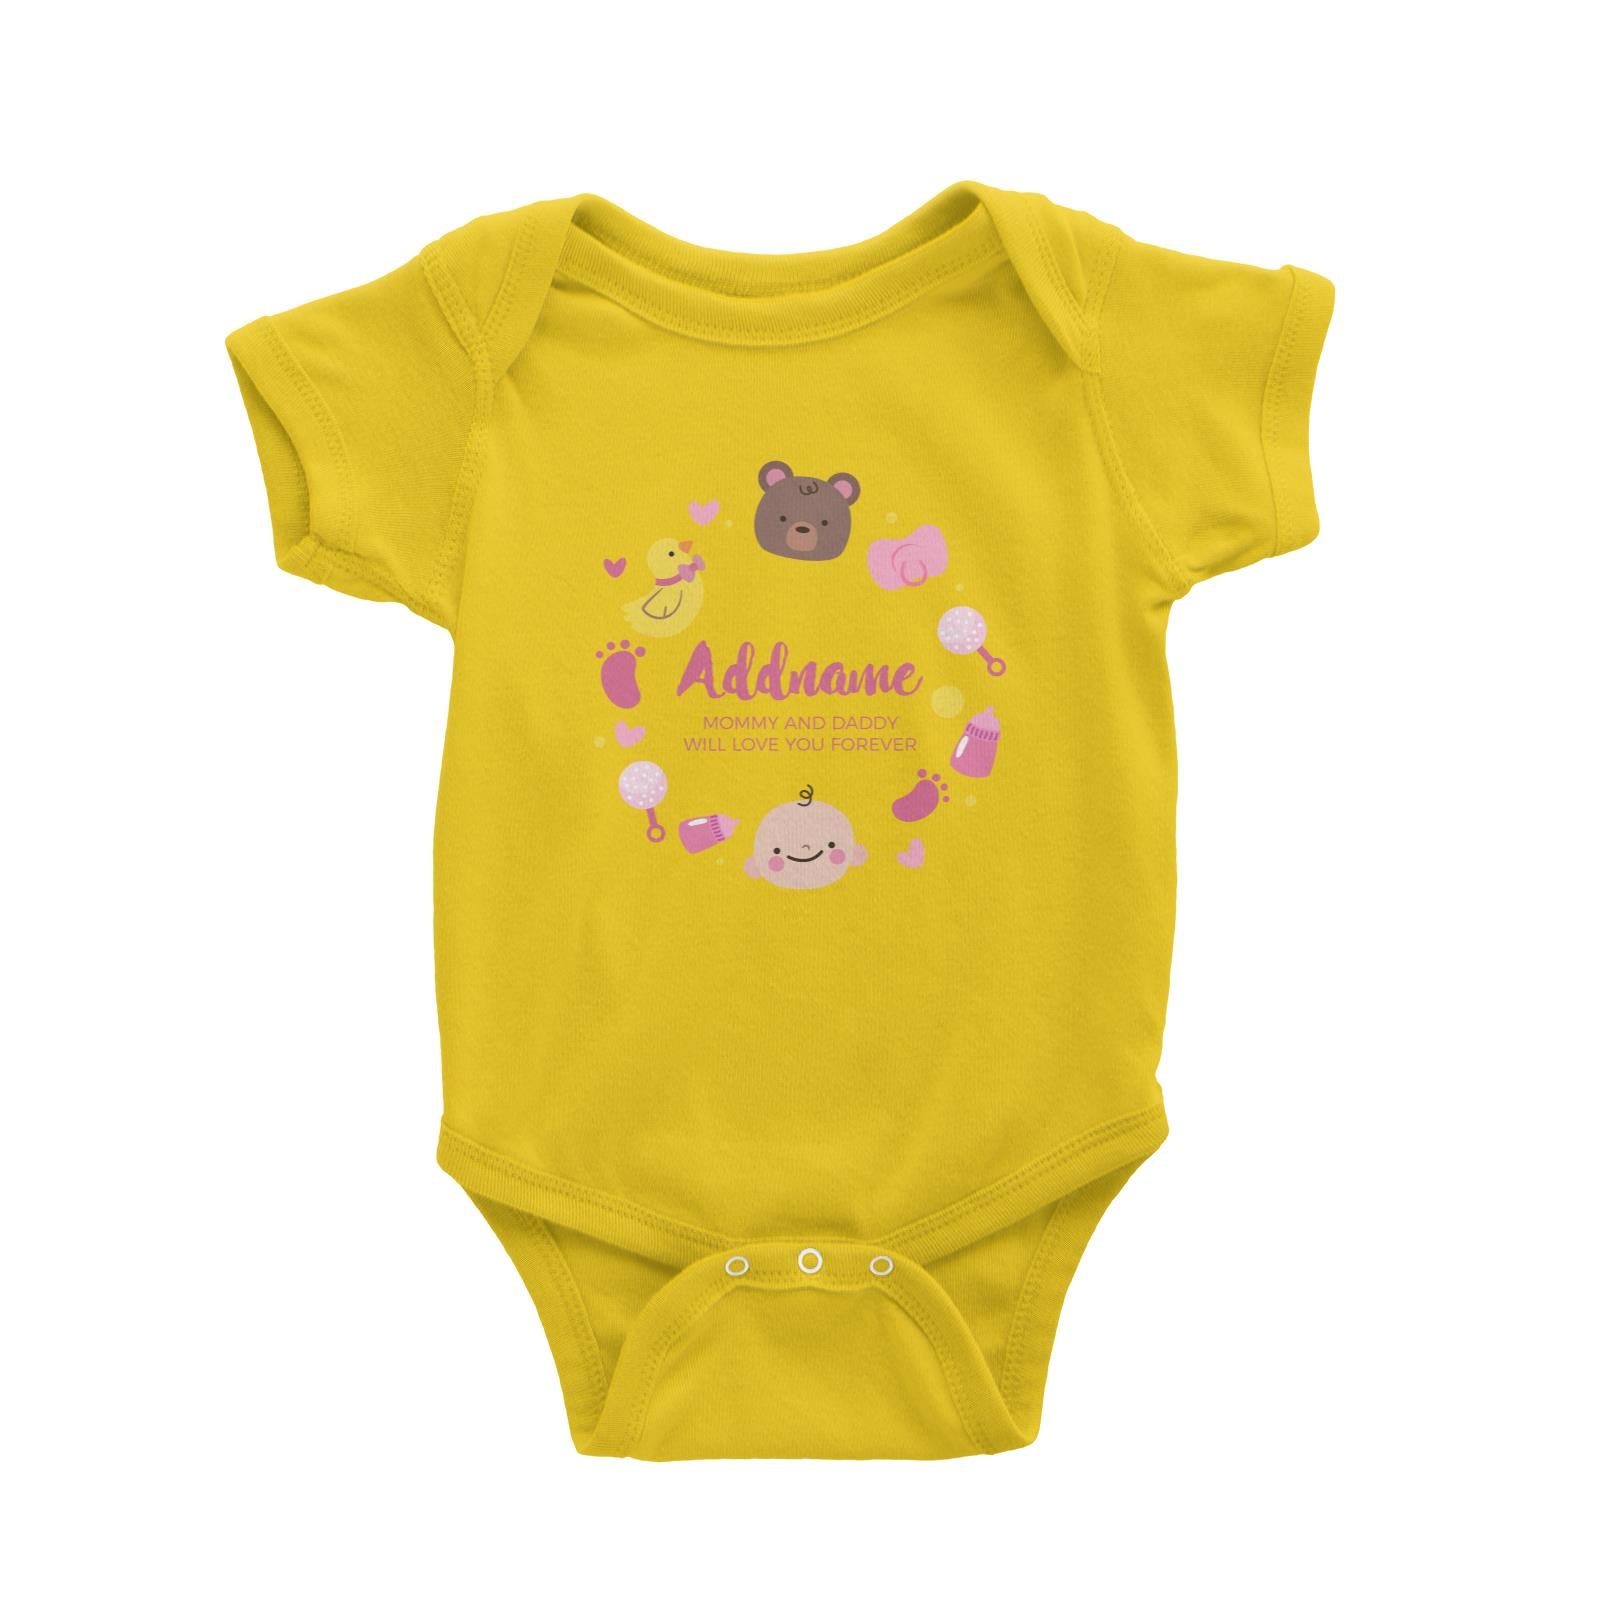 Cute Baby Girl Elements Personalizable with Name and Text Baby Romper